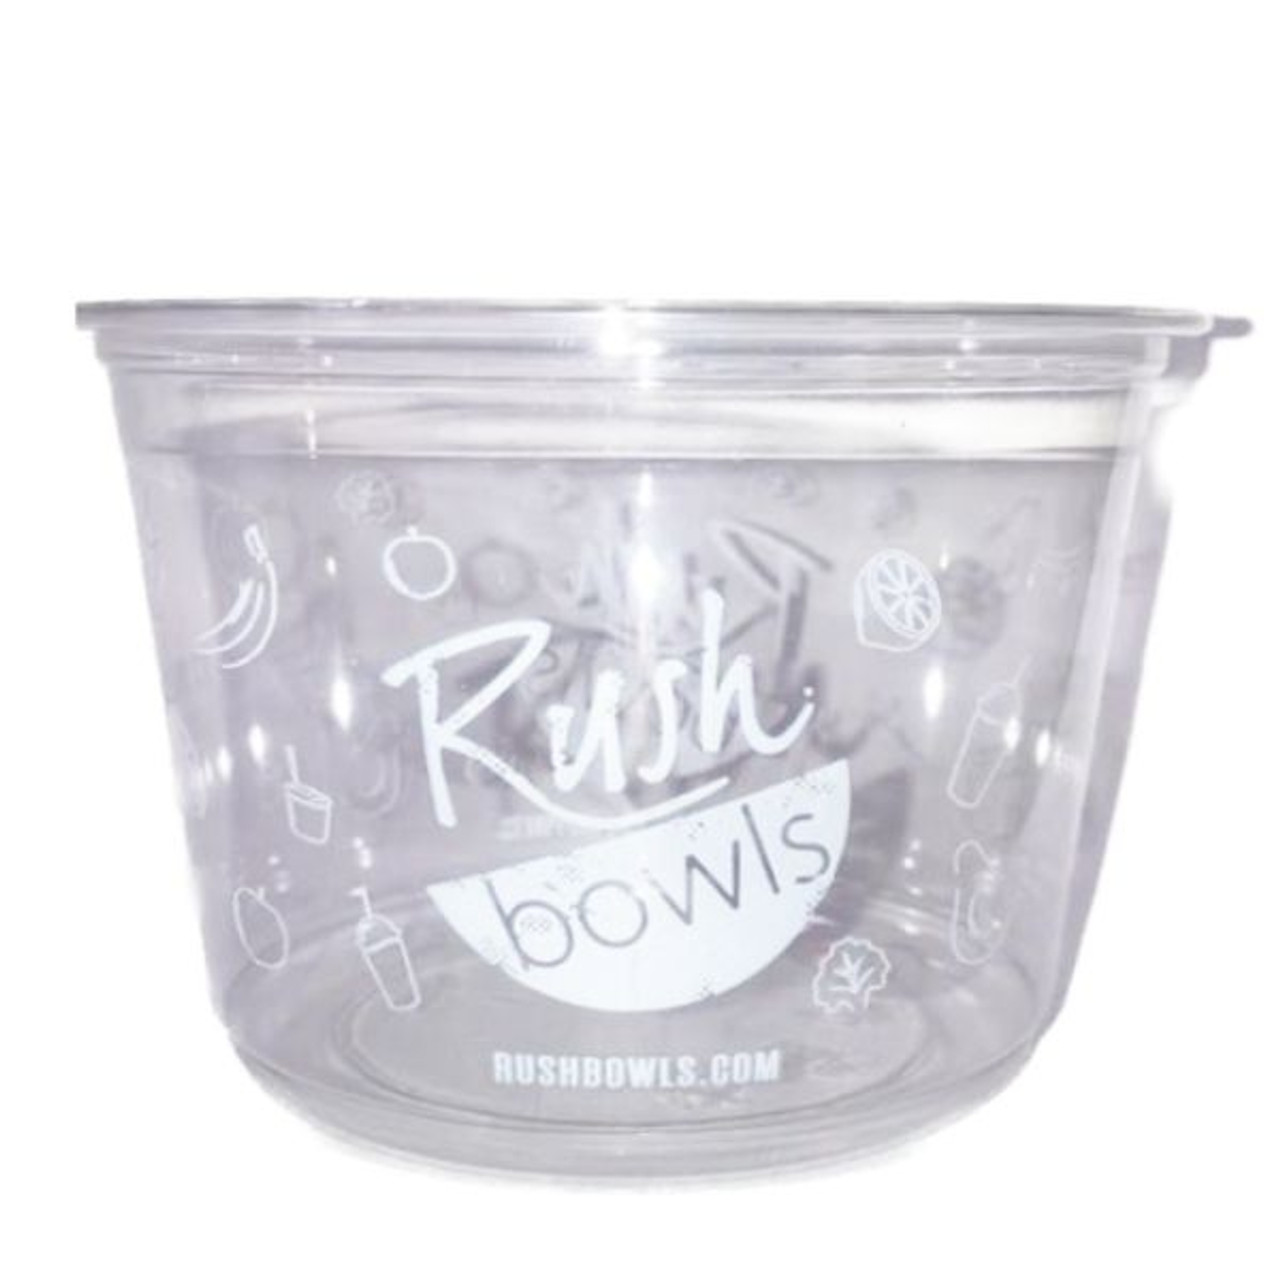 Rush Bowls 16oz US Made Plastic Deli Container - 500ct - Frozen Solutions